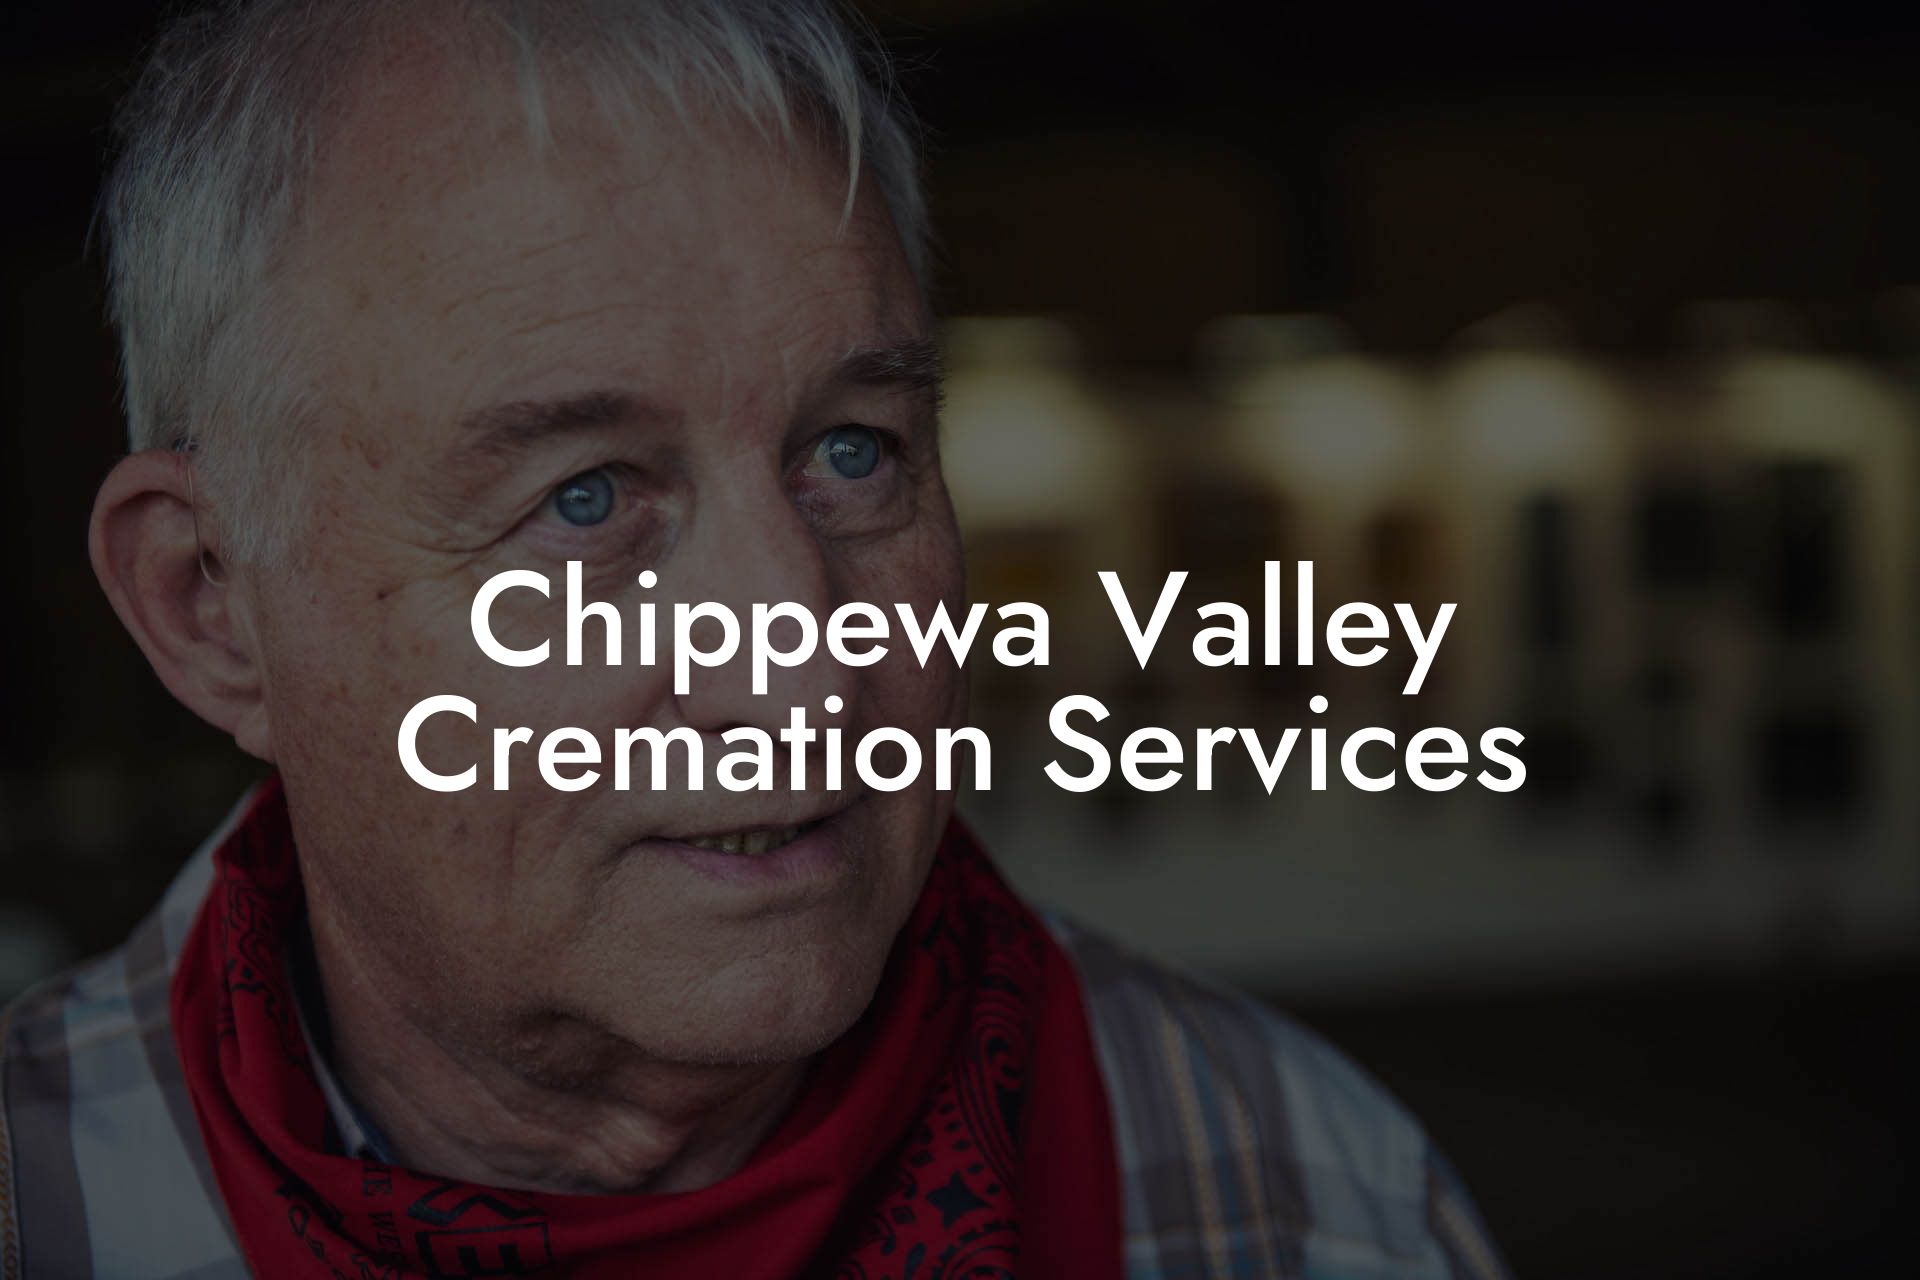 Chippewa Valley Cremation Services